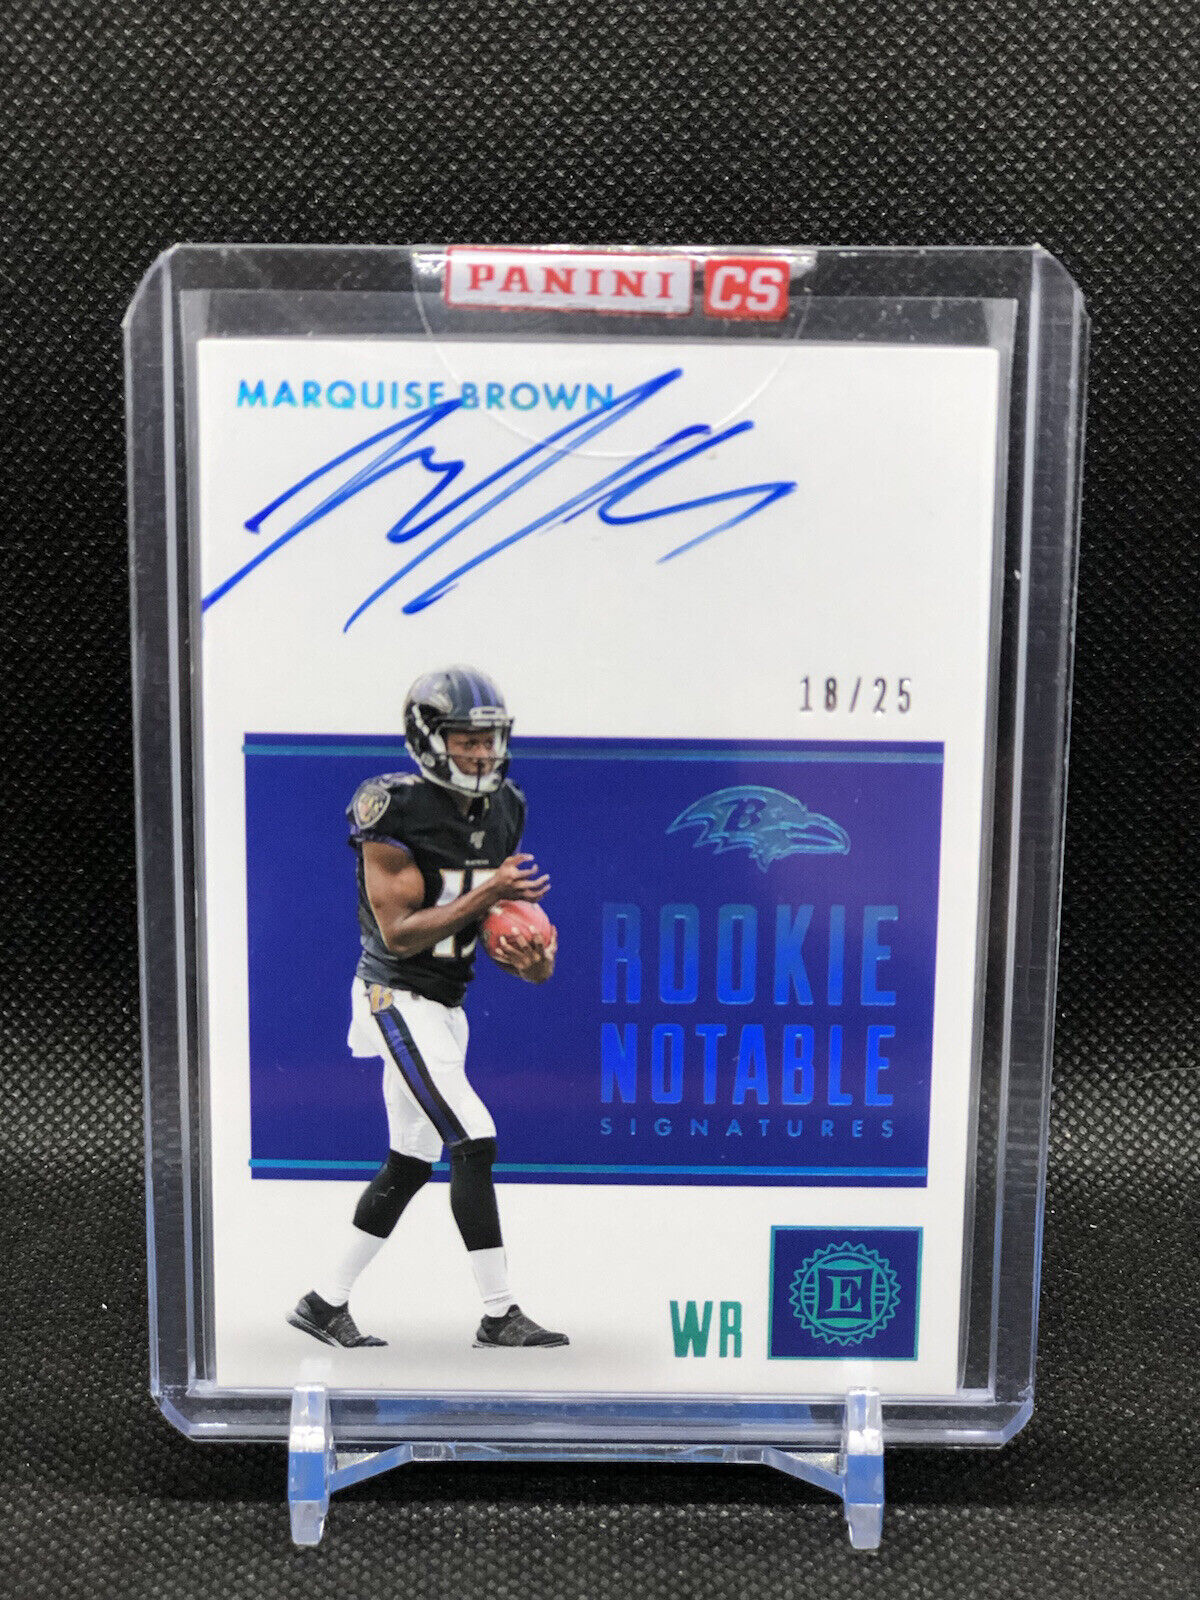 2019 Panini Encased Marquise Brown Rookie Notable Signatures on Card Auto 18/25